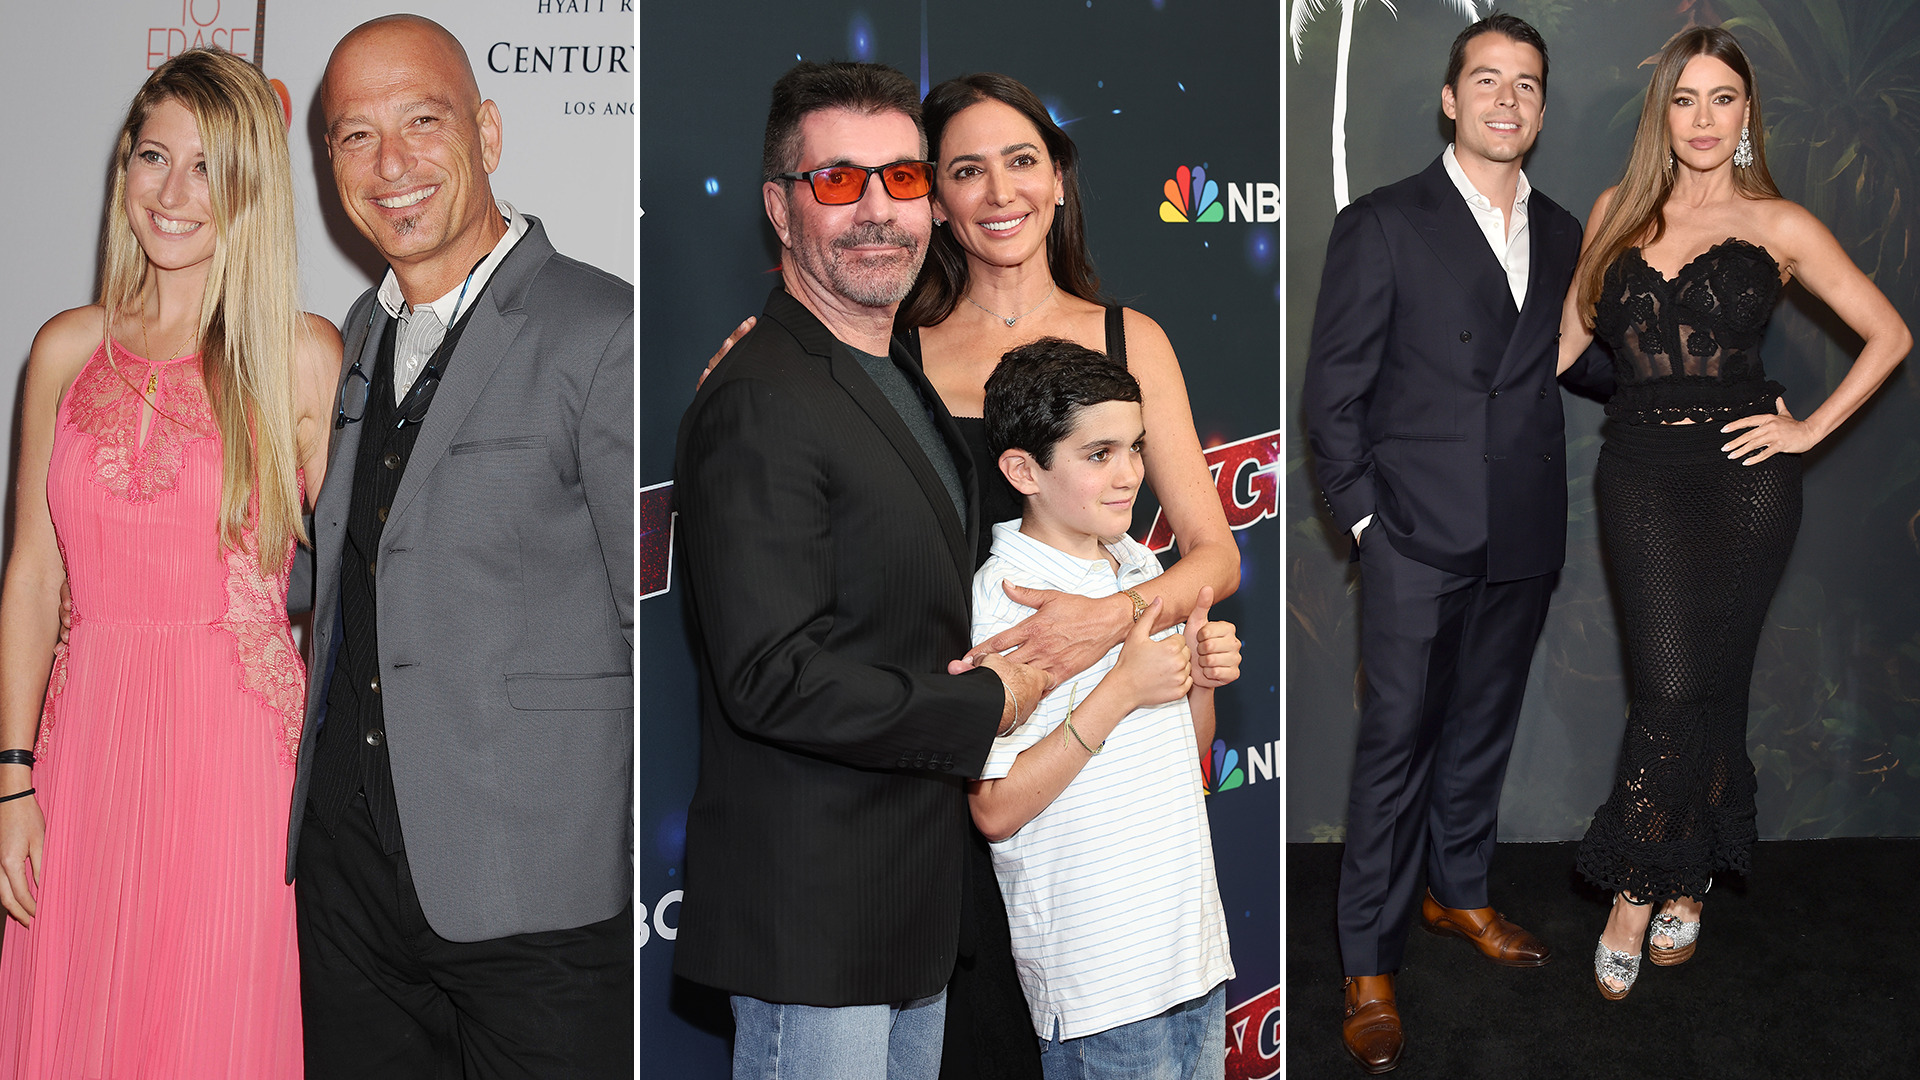 split image showing Howie Mandel, Simon Cowell and Sofia Vergara with their kids